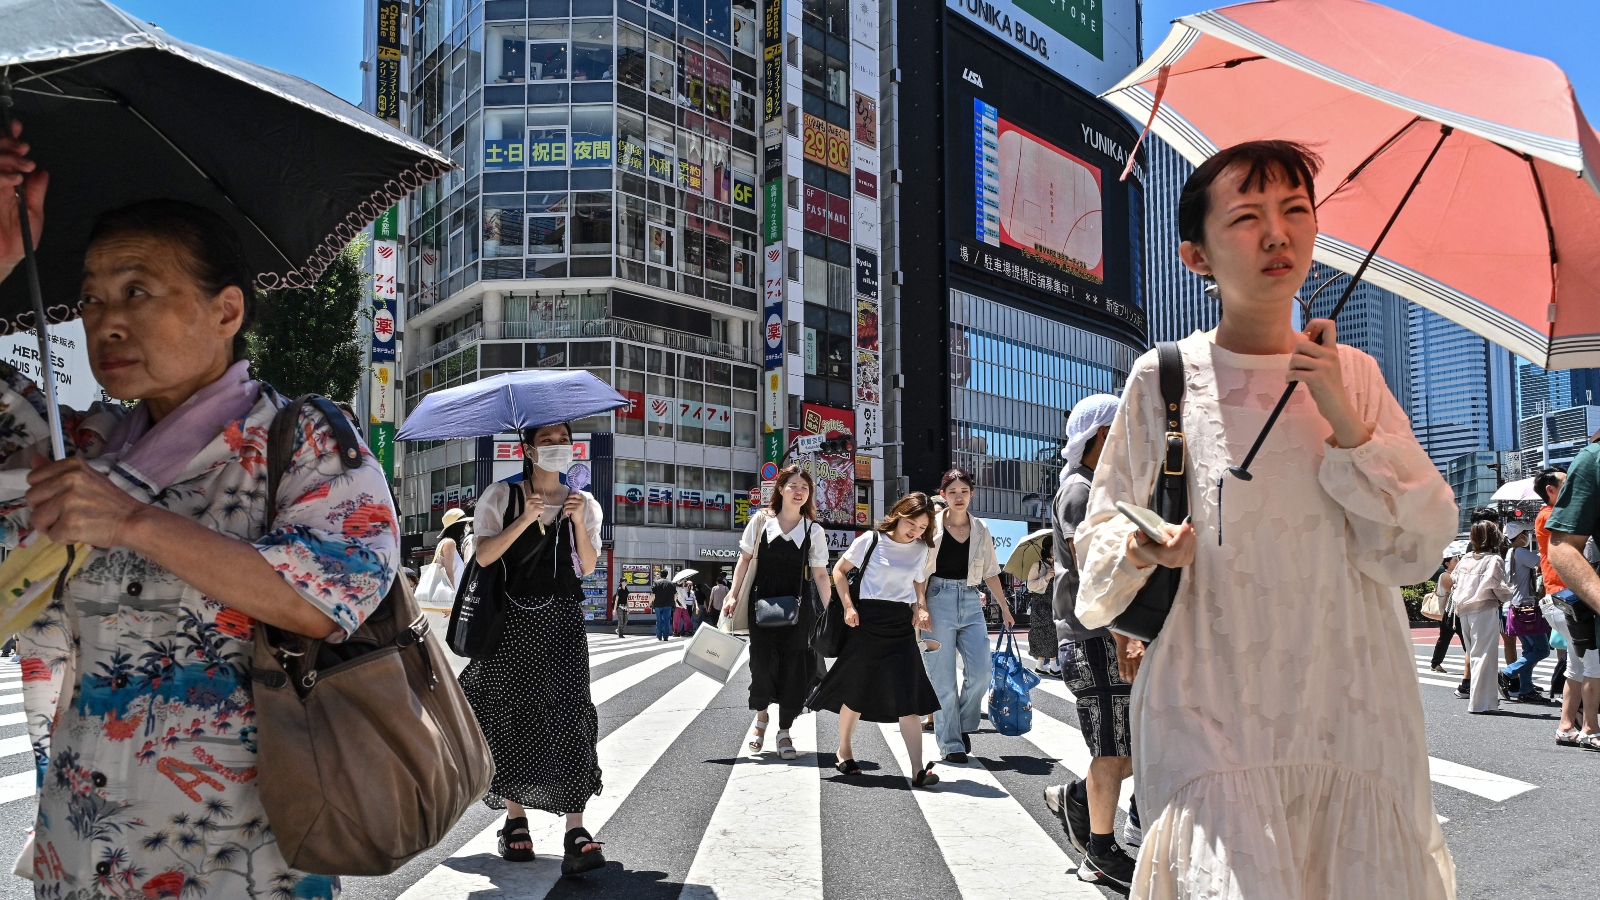 People using umbrellas and parasols to seek relief from the heat while crossing a street in Tokyo.